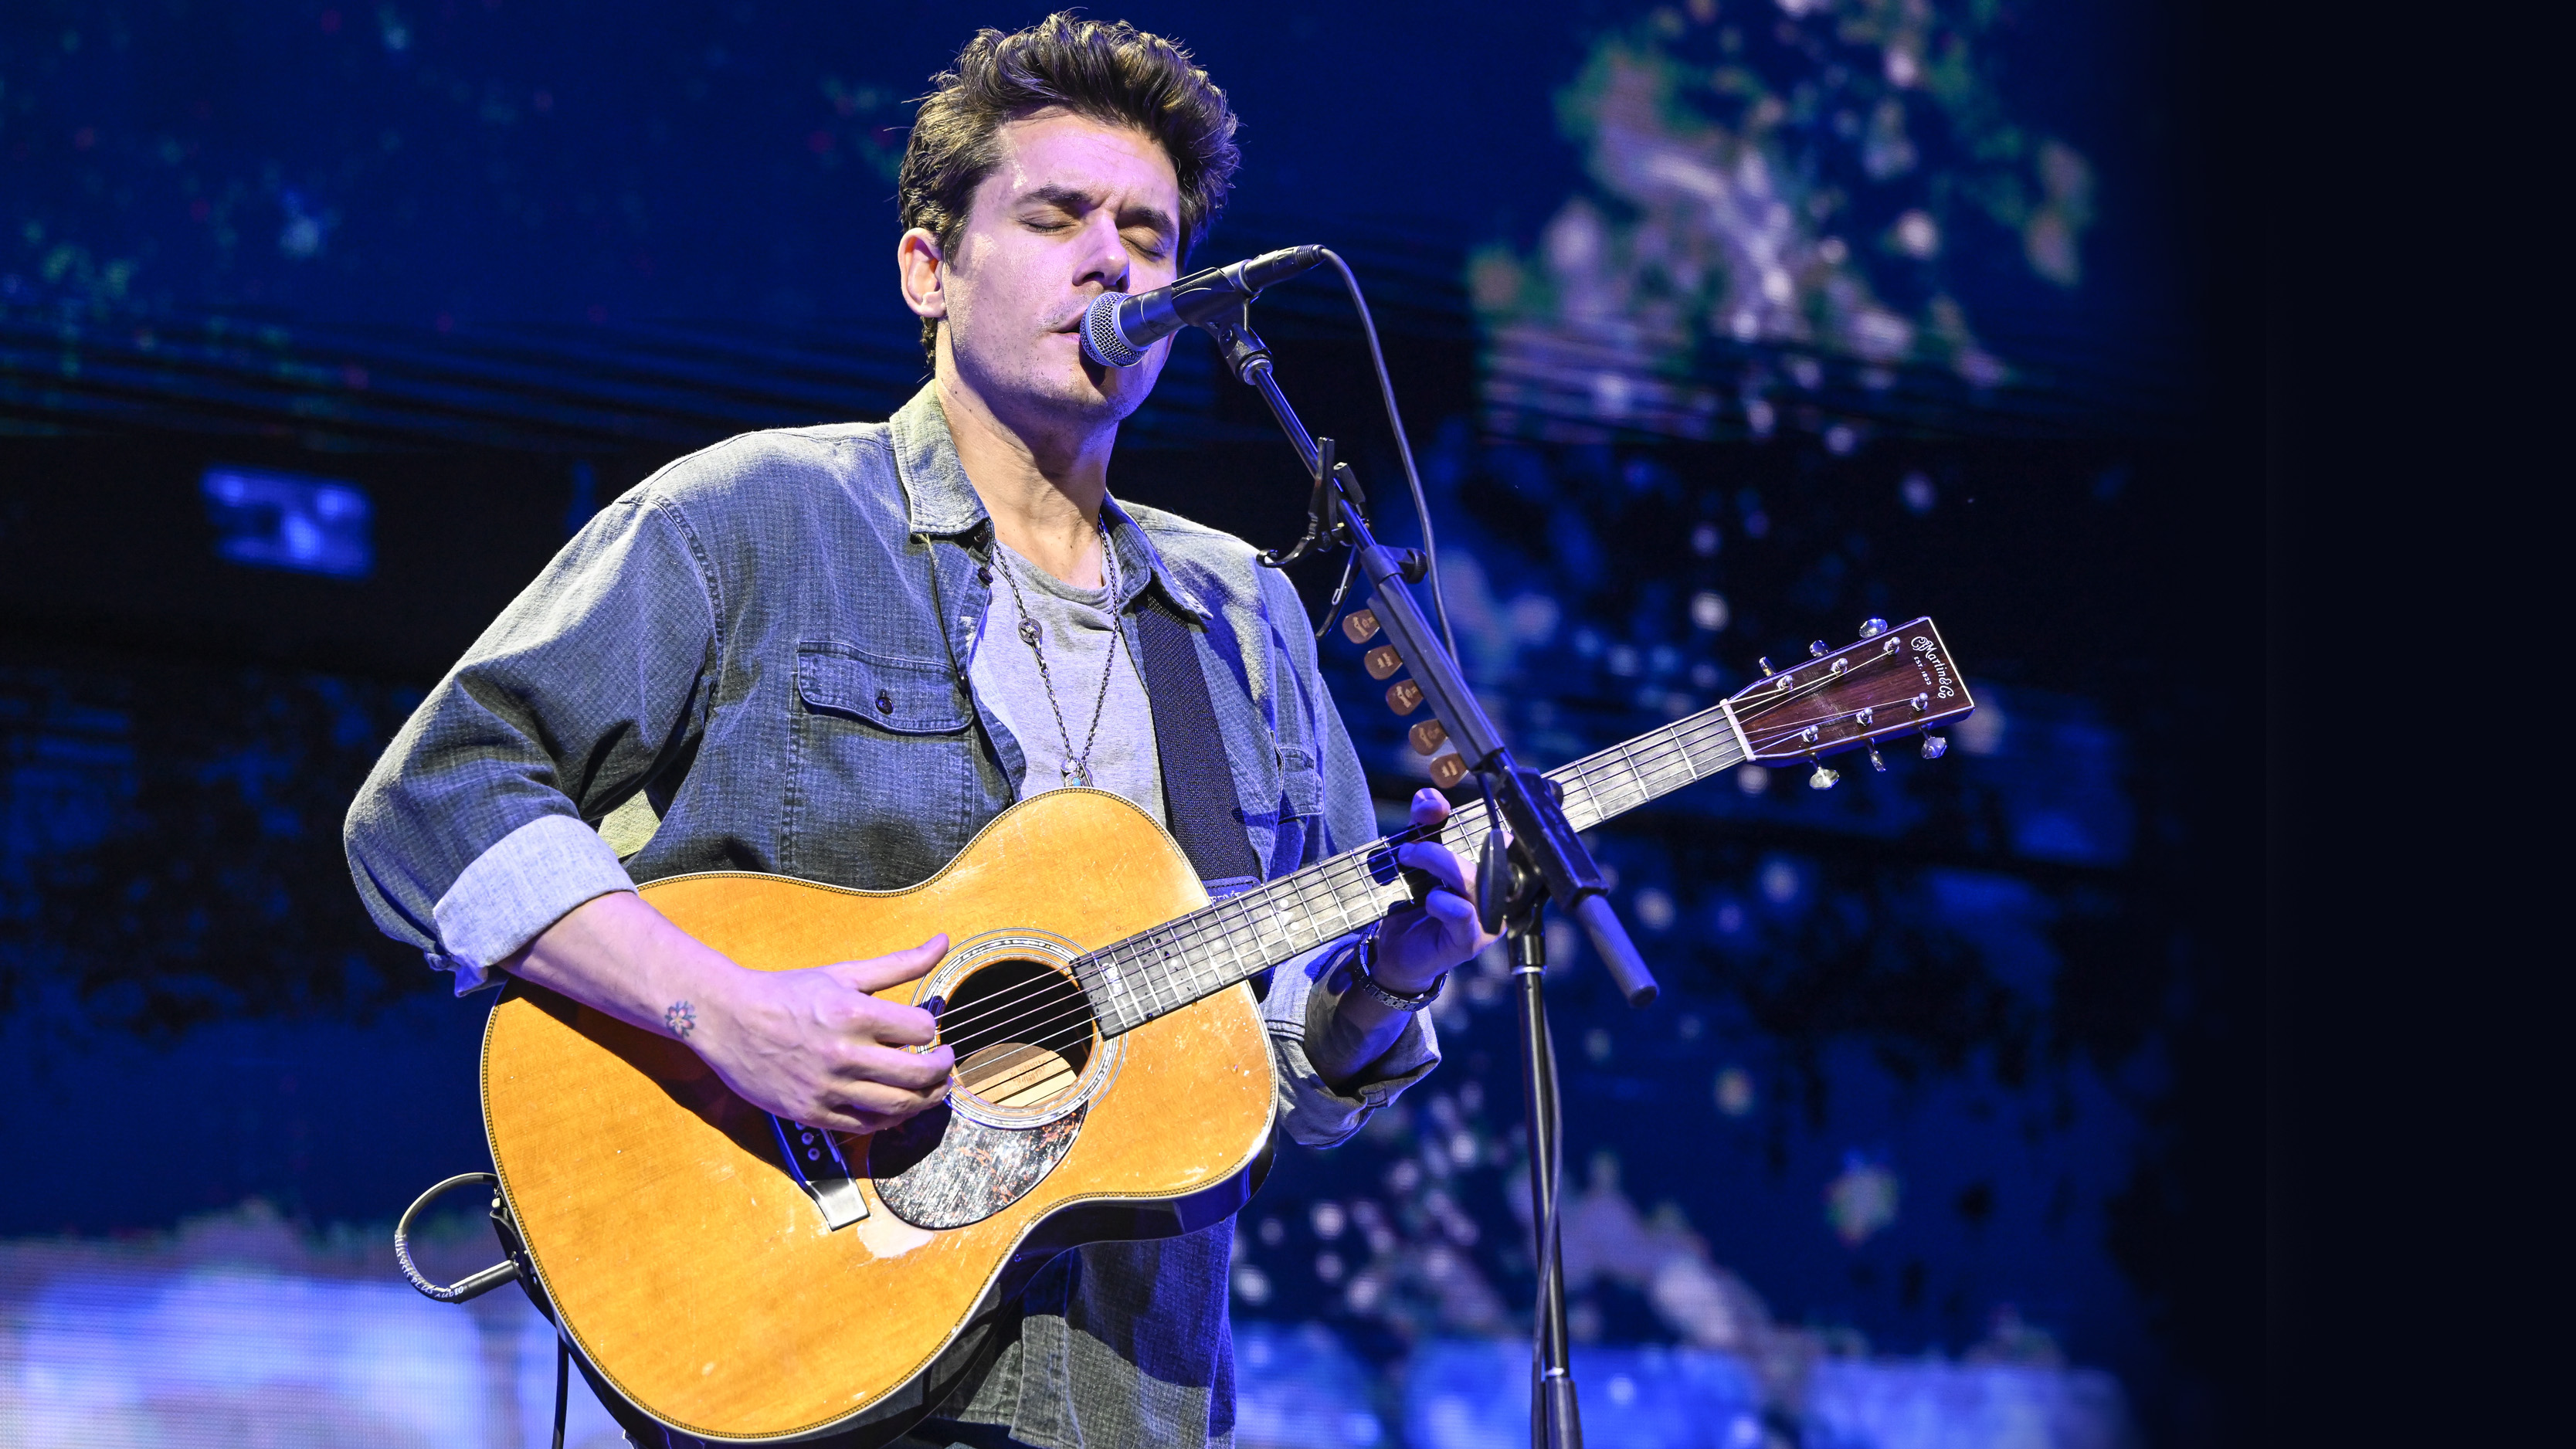 John Mayer live, acoustic and alone our 6 favourite performances